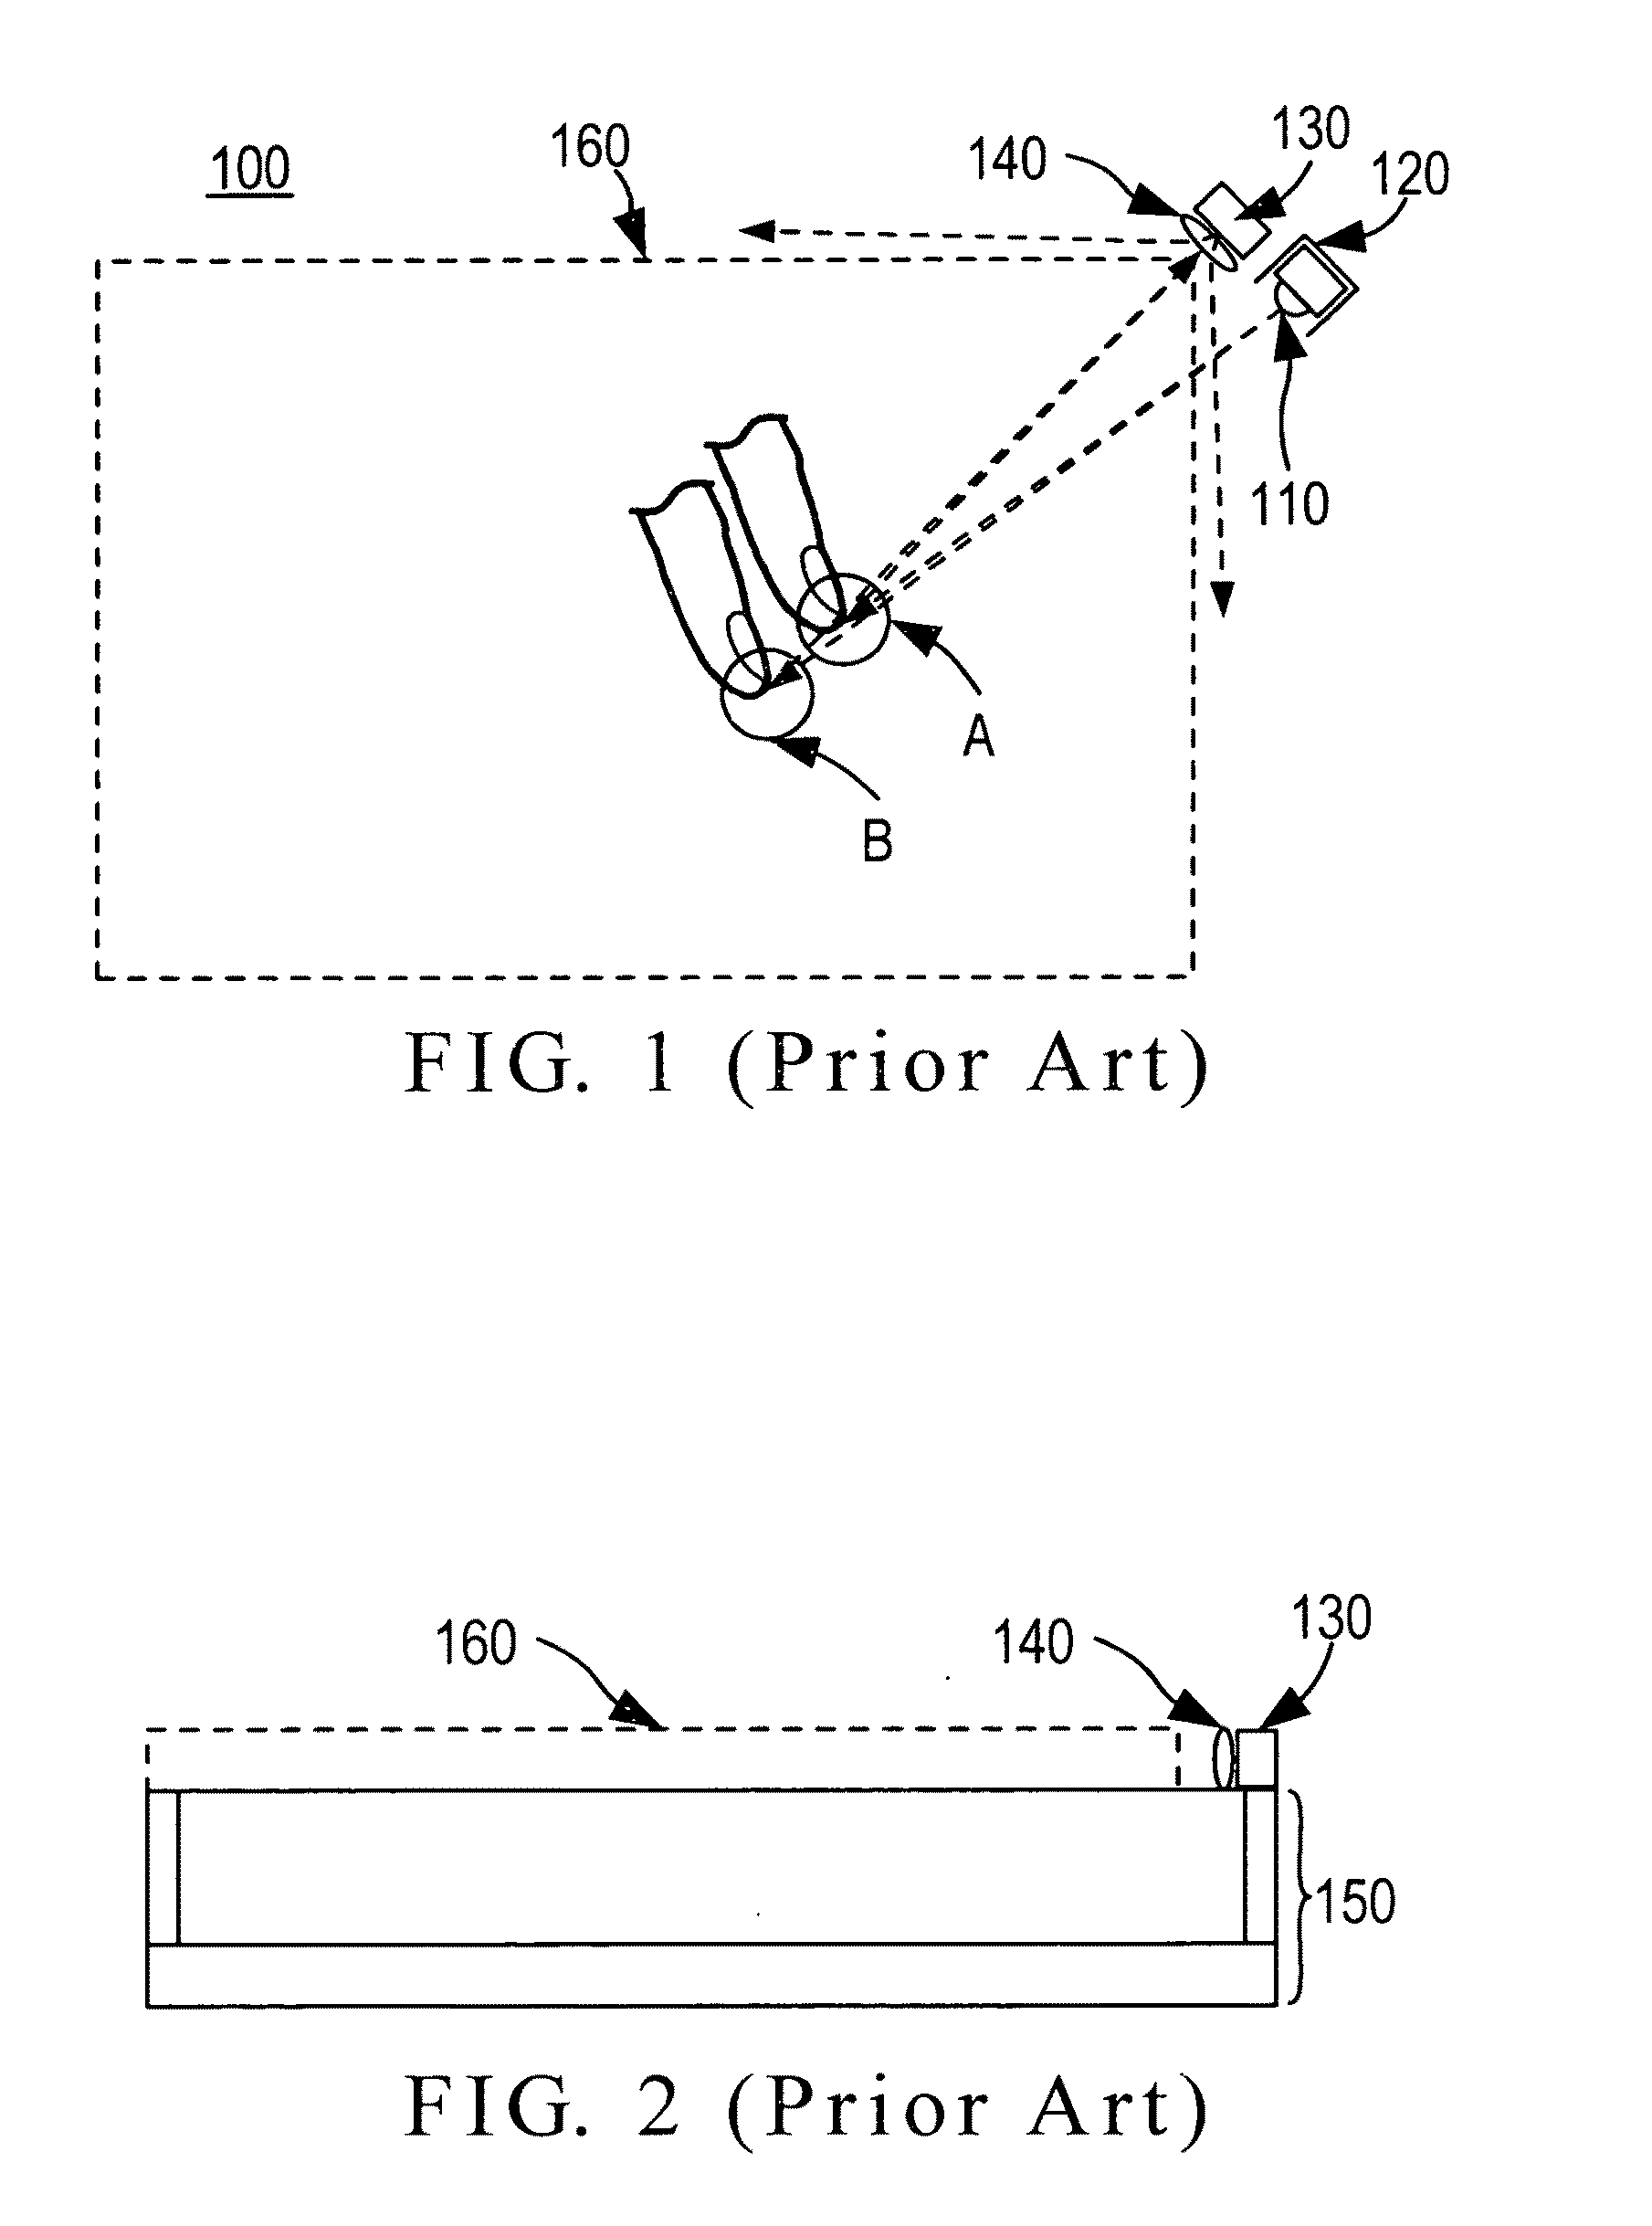 Optical touch screen system and method for recognizing a relative distance of objects